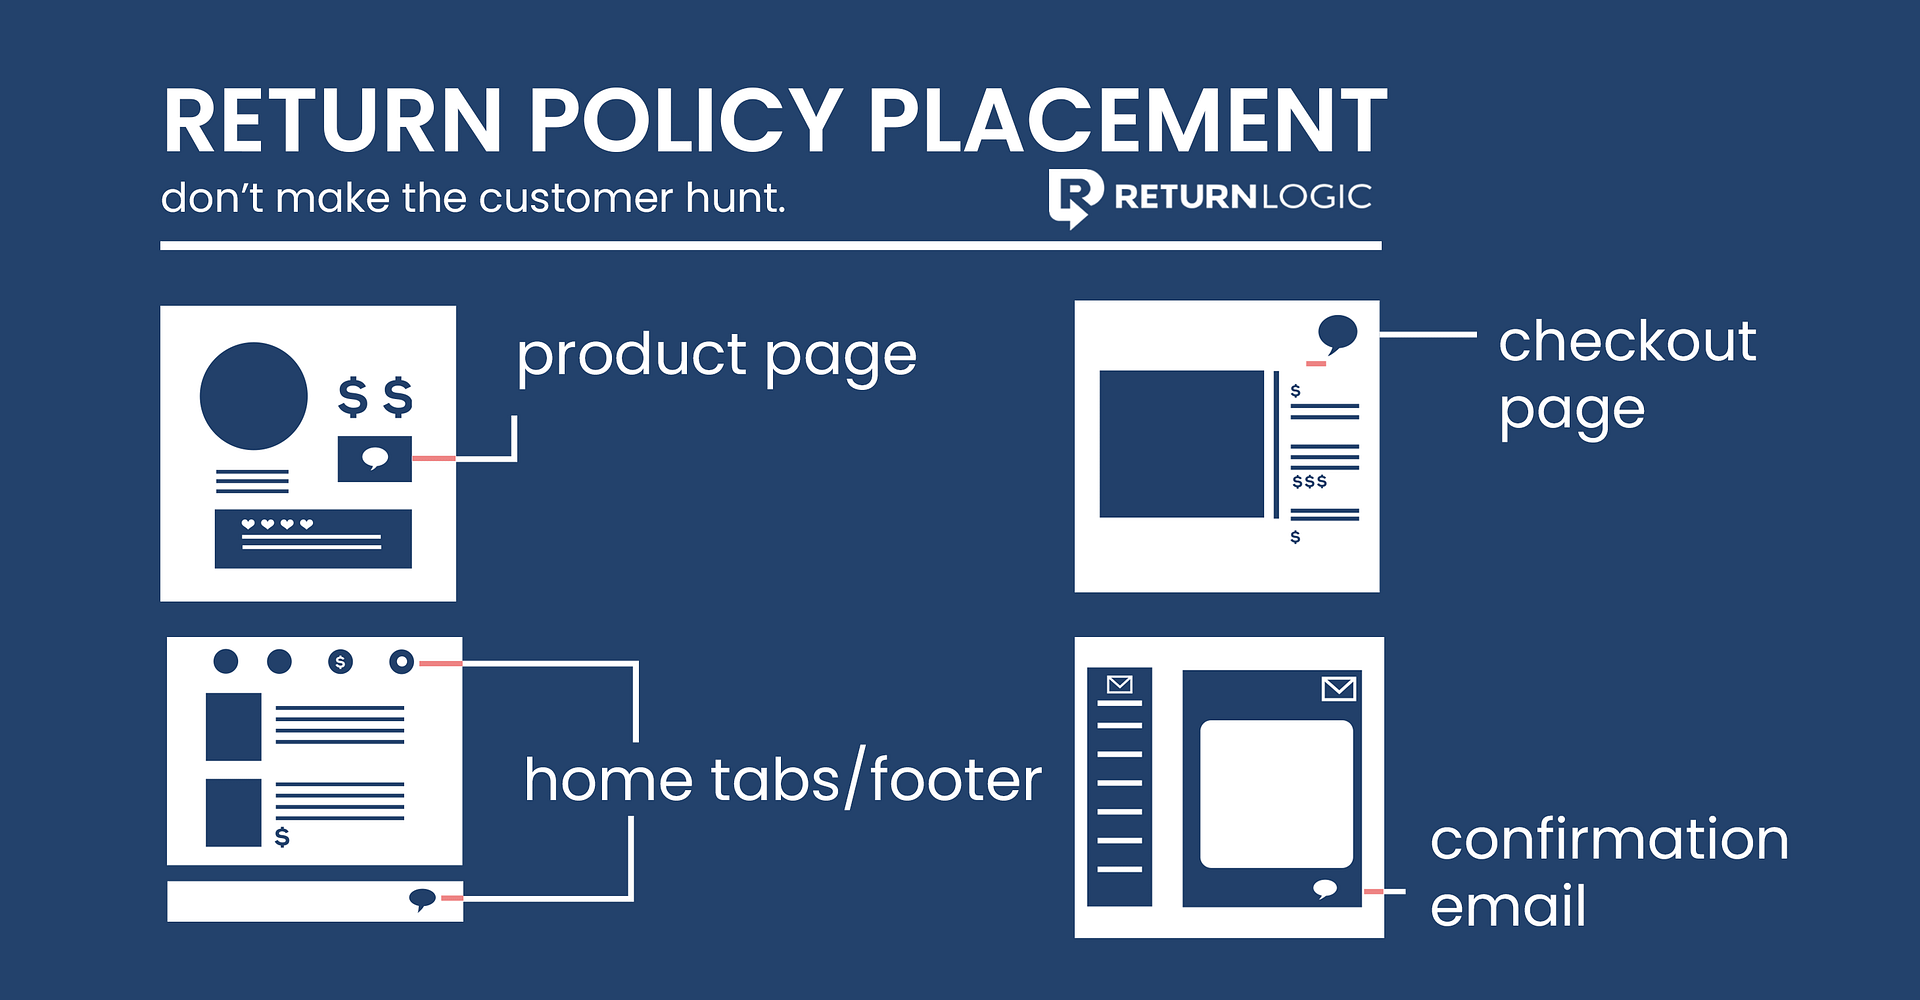 Return Policy Placement